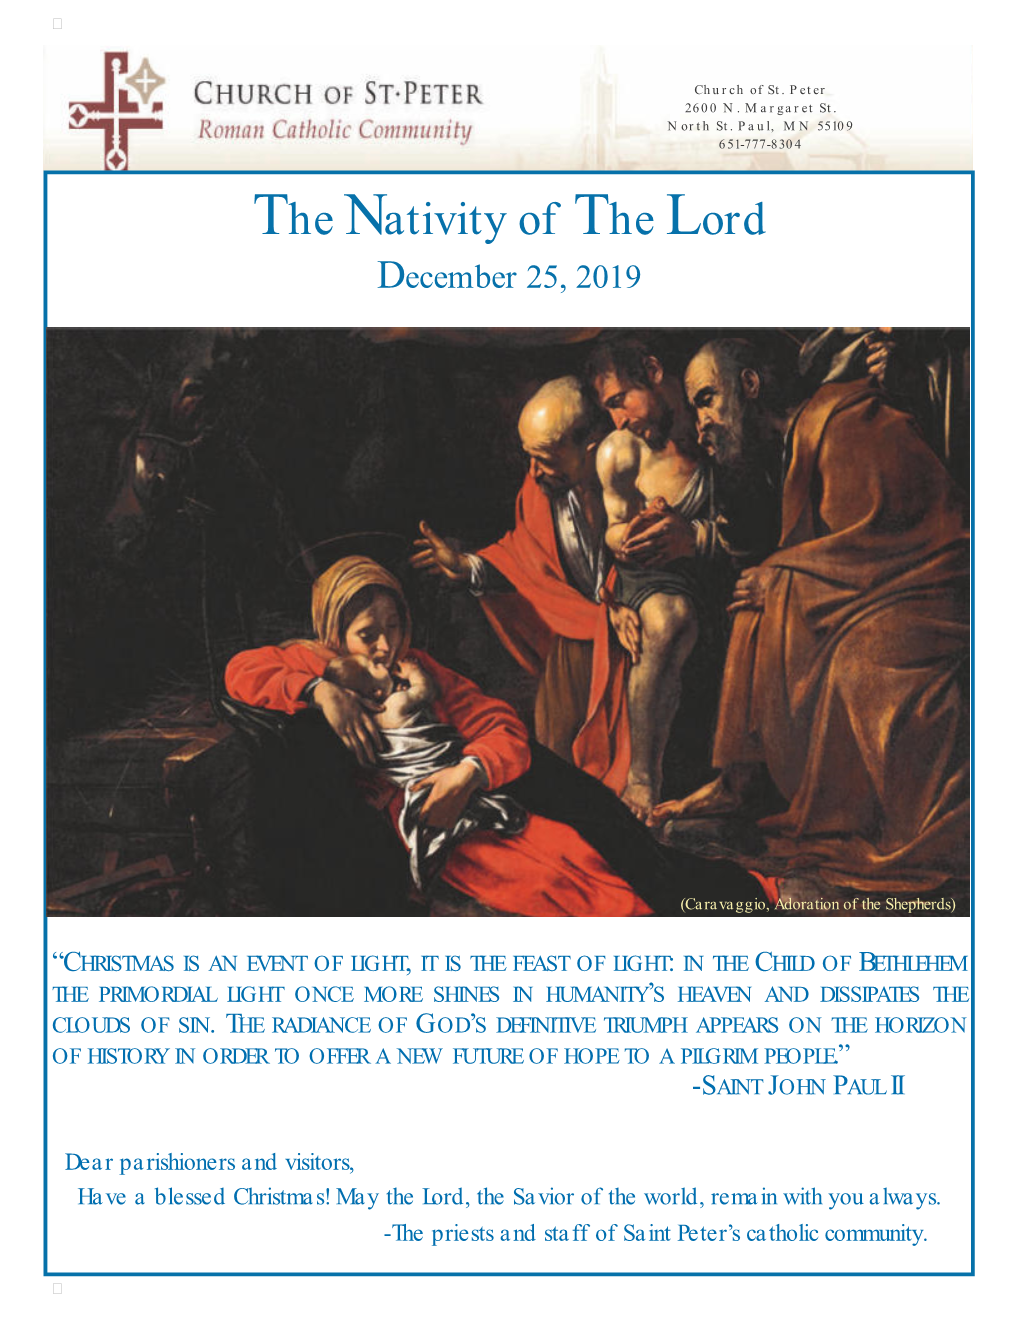 The Nativity of the Lord December 25, 2019